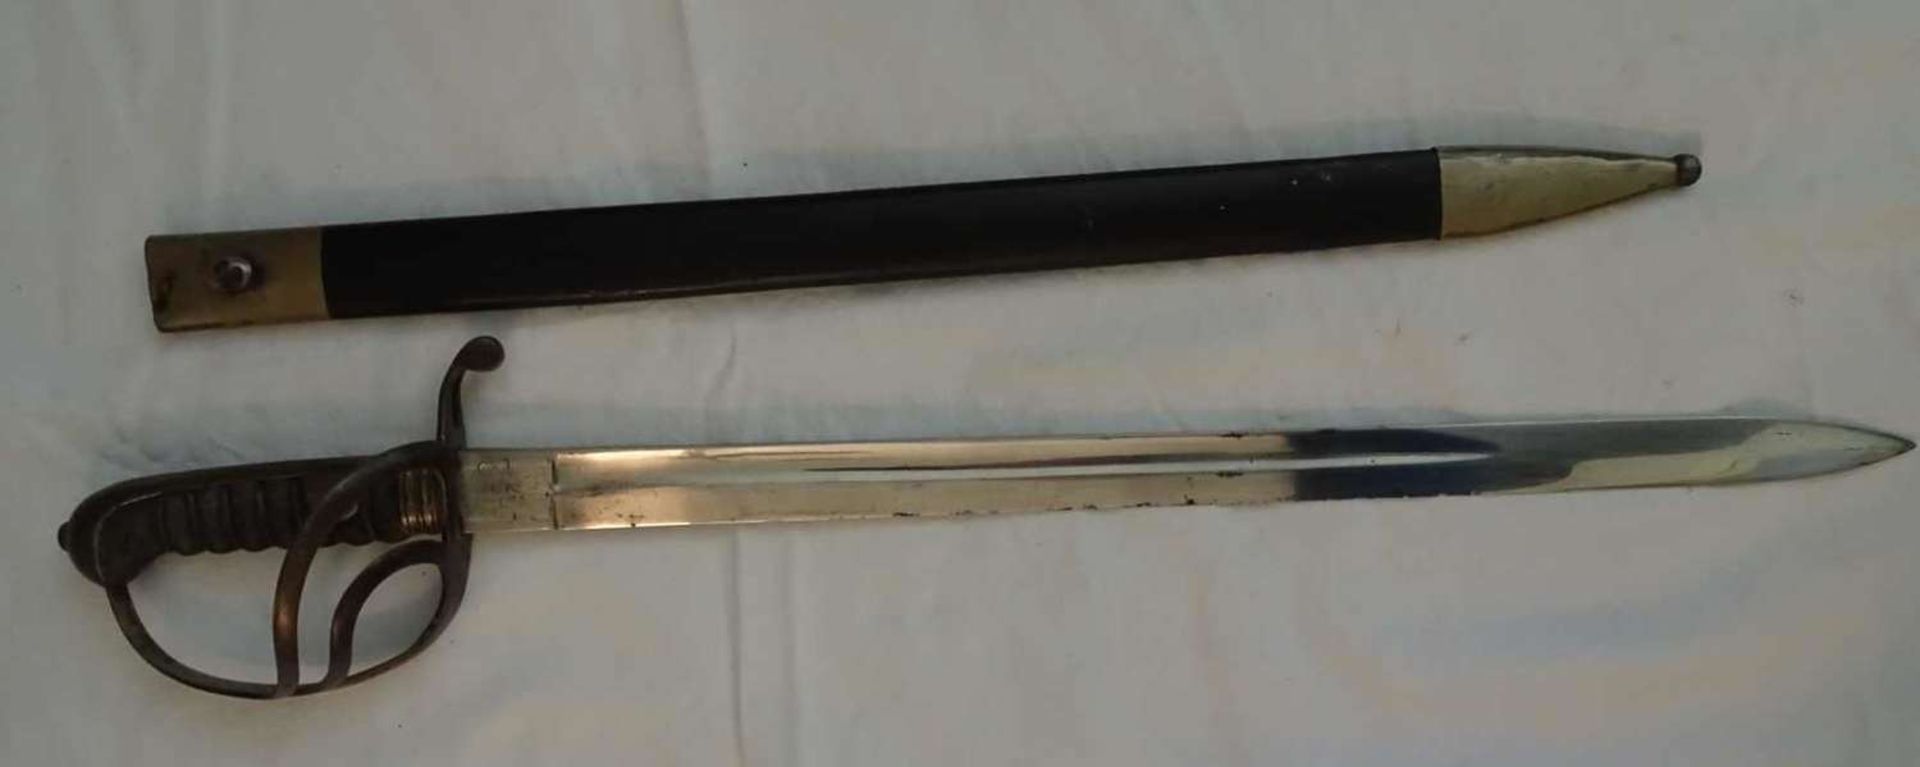 Cavalry saber Prussia, very good condition. Engraving 392 at the end of the blade. Overall length